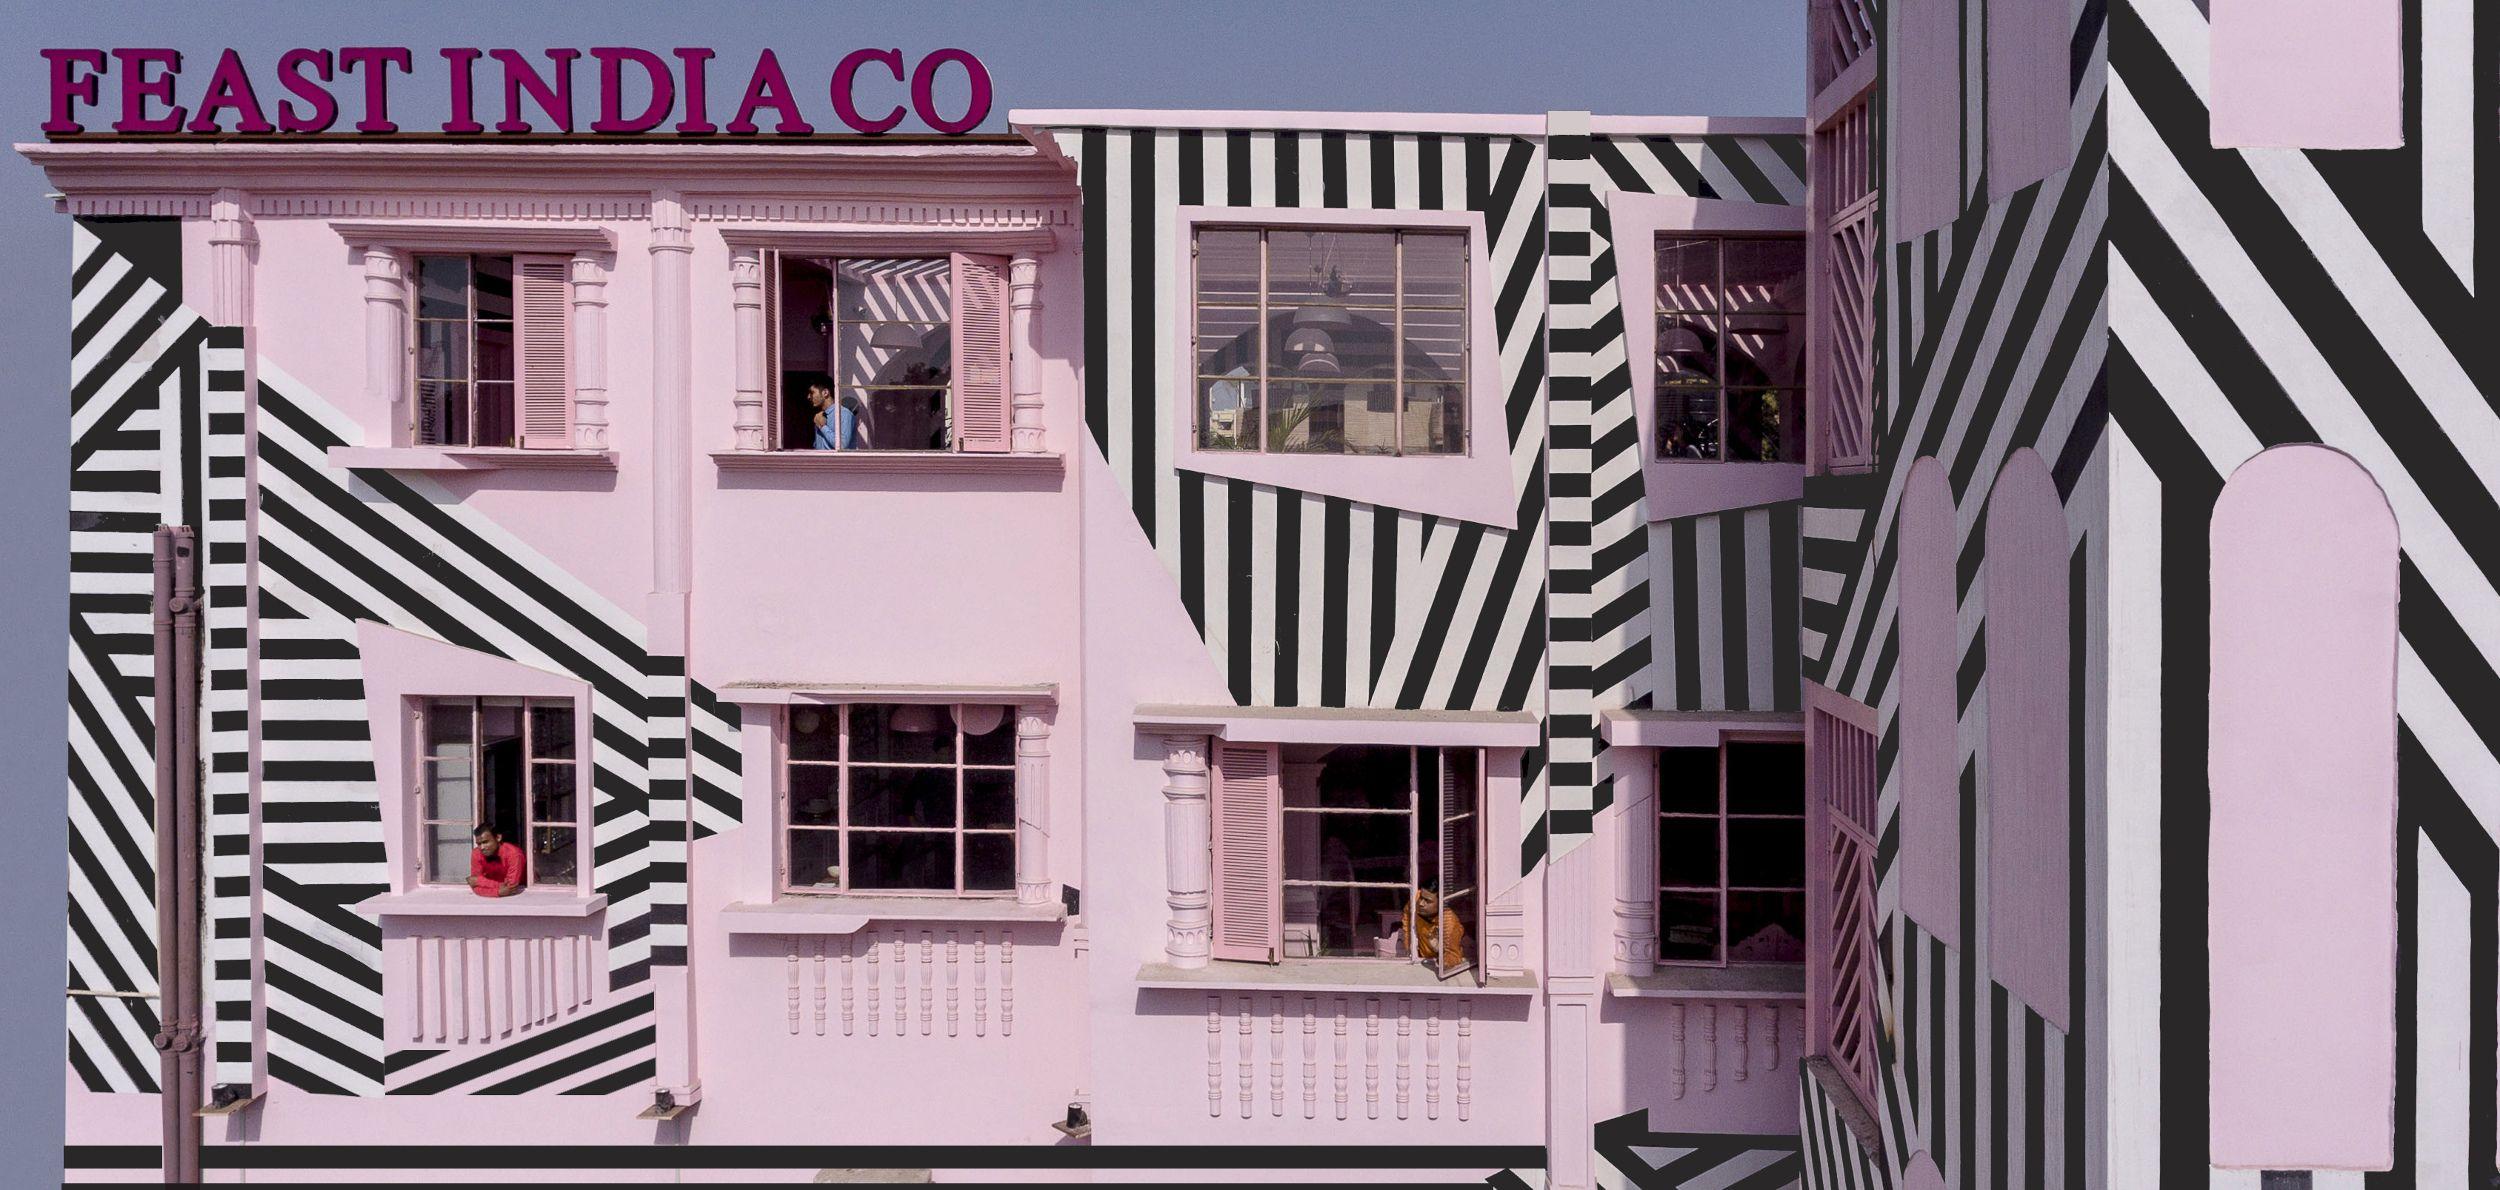 Pink Zebra Company Logo - The Wes Anderson-inspired restaurant in India decorated like a pink ...